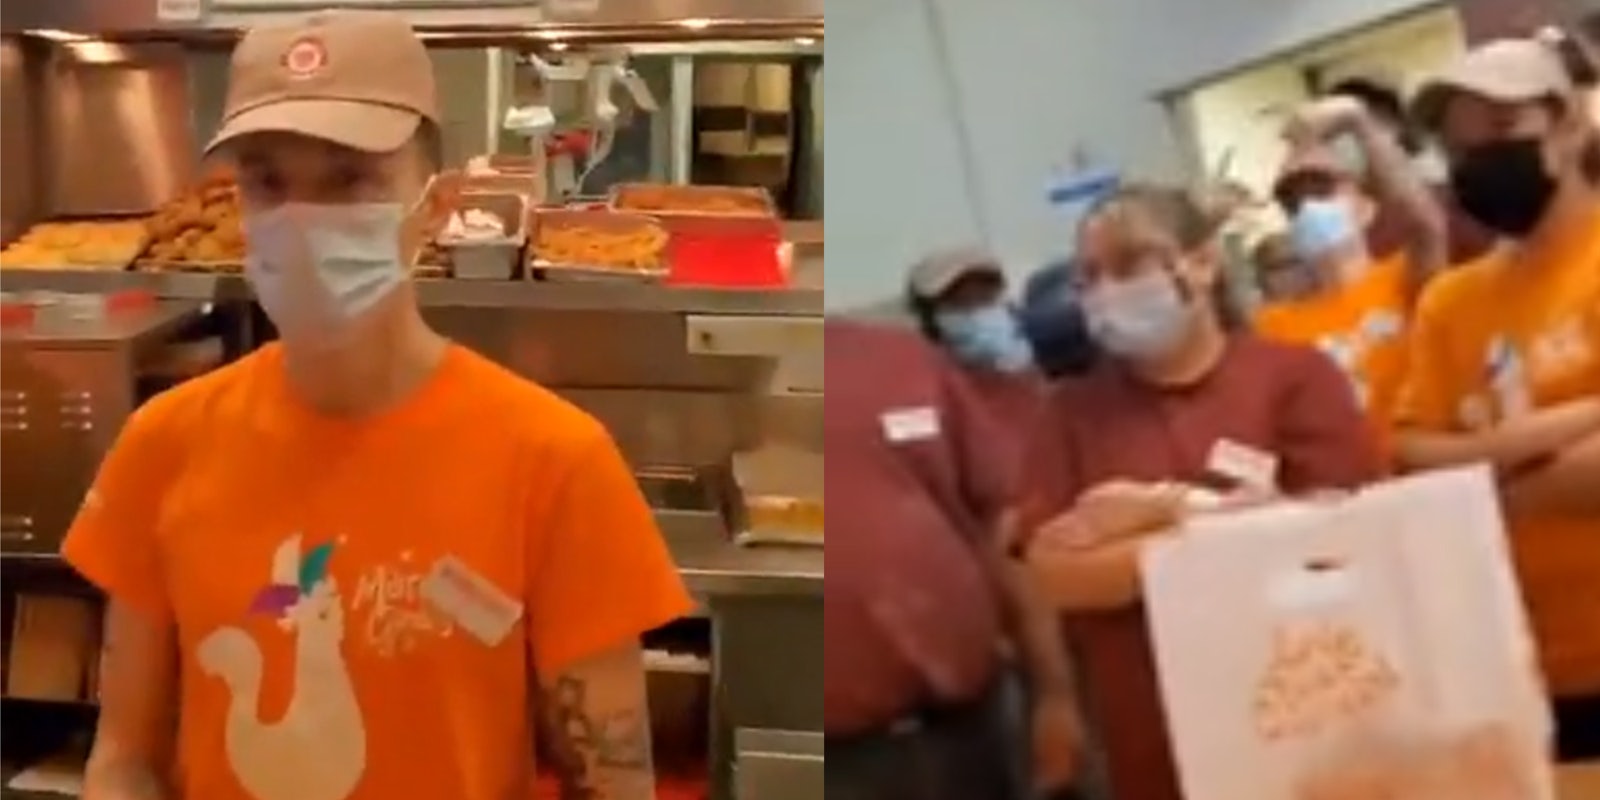 popeye's worker in facemask (l) popeye's worker throwing gang signs as co-workers stand with arms crossed (r)